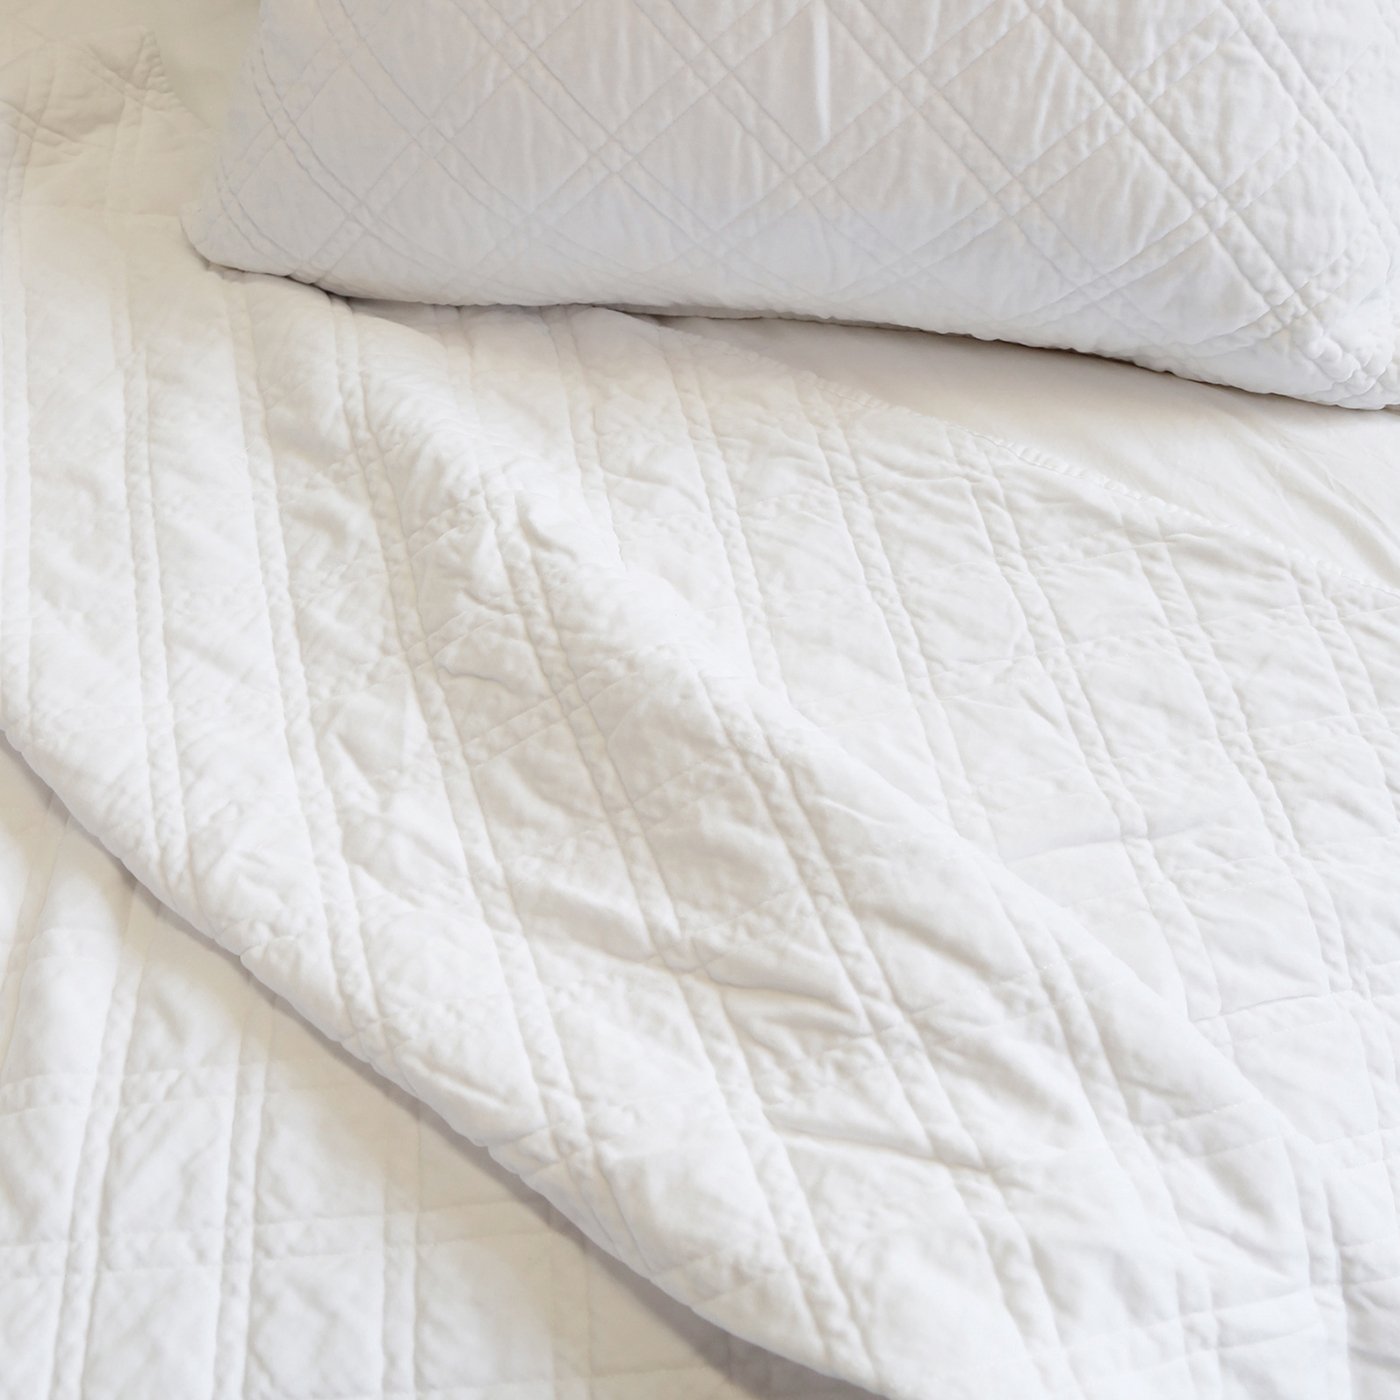 POM POM BRUSSELS COVERLET COLLECTION - WHITE